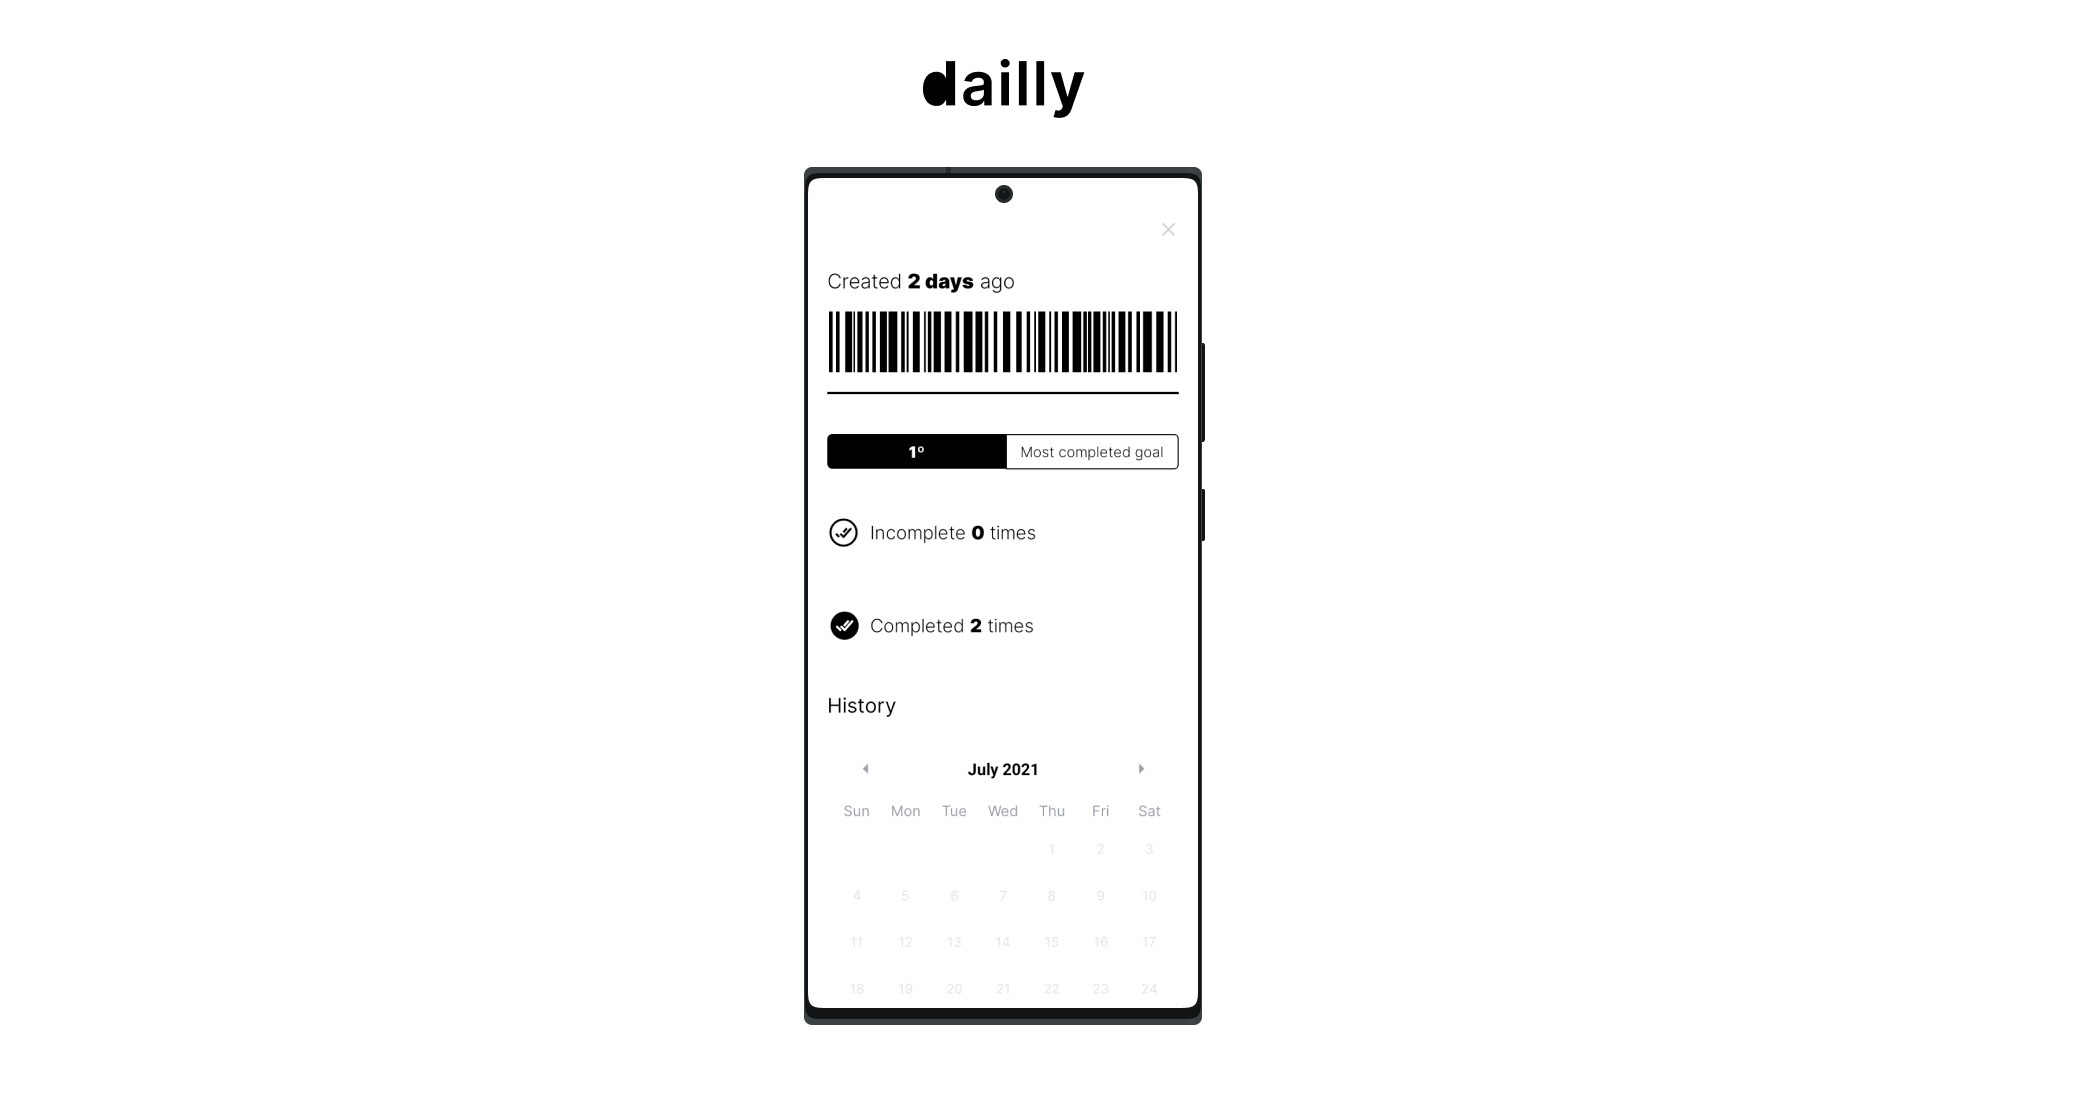 Find pricing, reviews and other details about Dailly